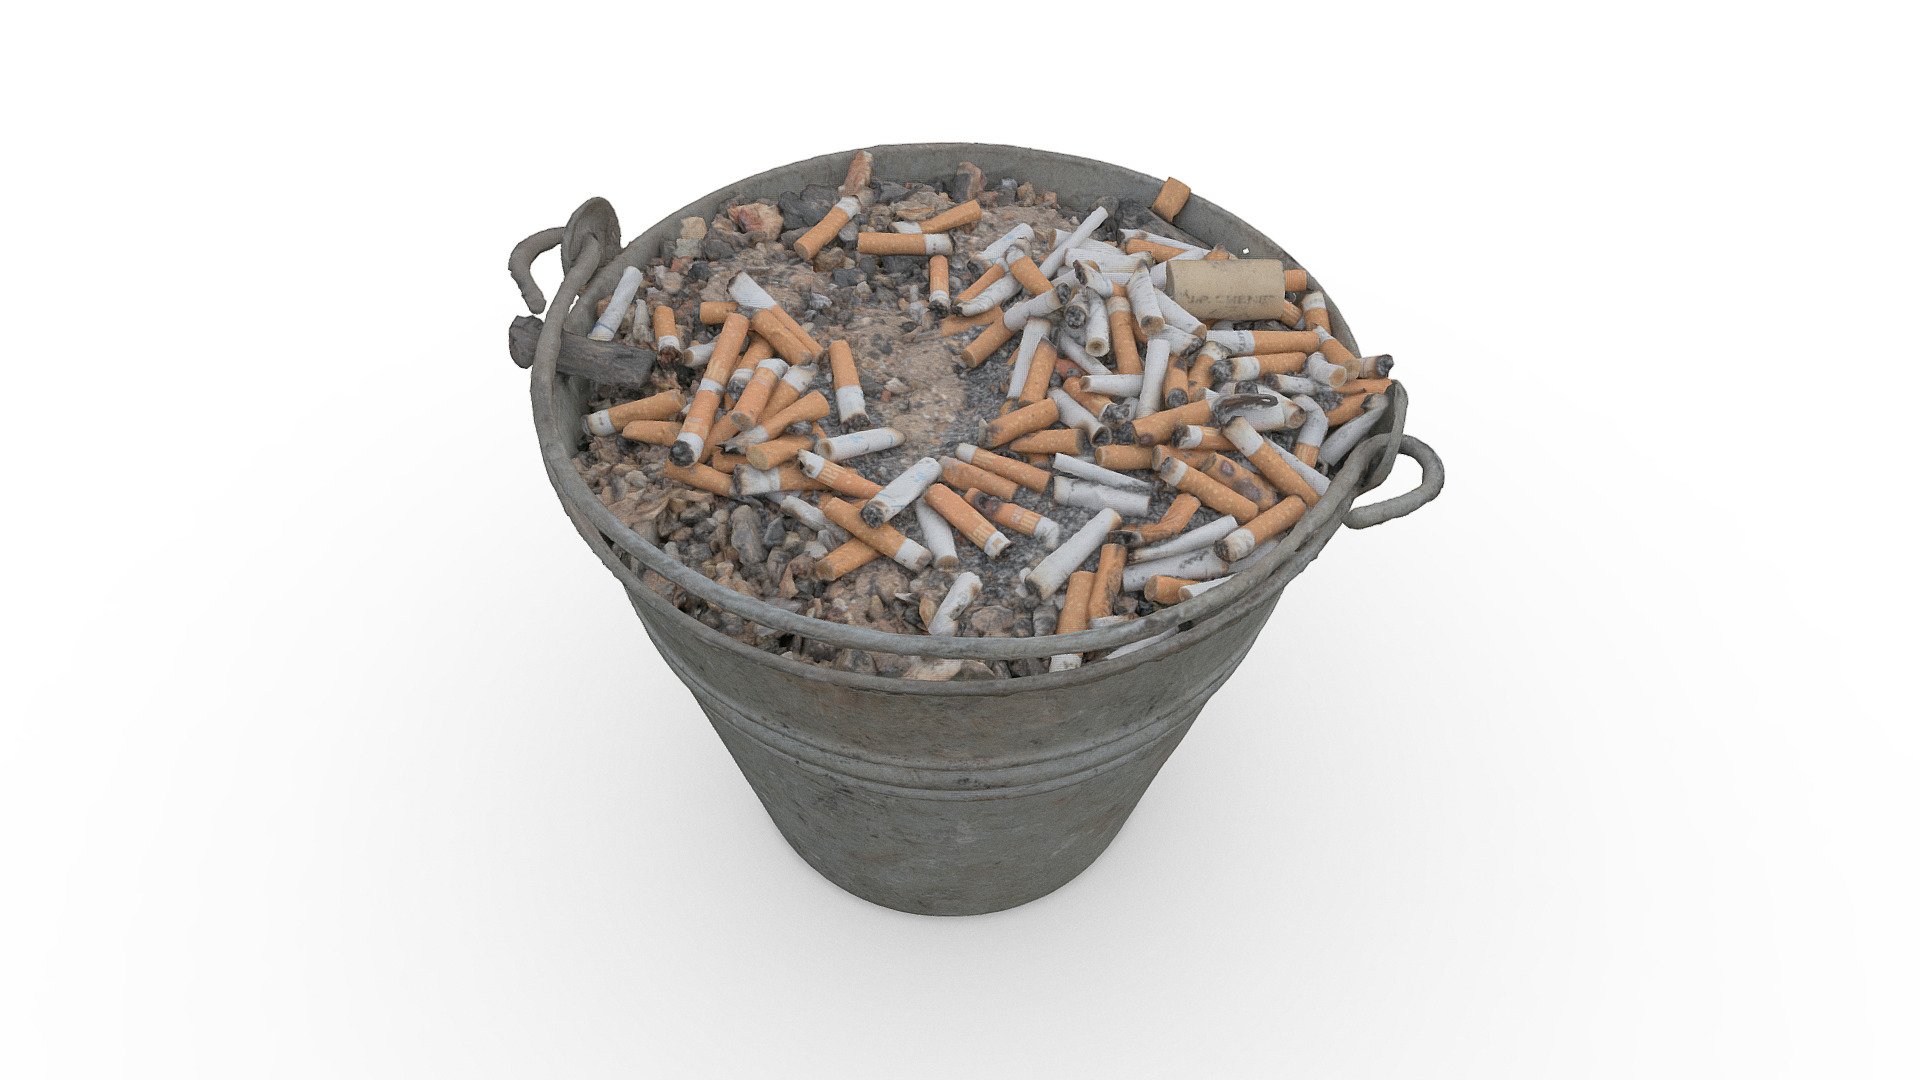 Metal bucket full of Ash fireplace debris clean up, cigarette buds butts fag spliff smoke, Rubble bucket container, old vintage rusty grungy style

Photogrammetry scan 120x24MP, 2x8K texture - Cigarette butts bucket - Buy Royalty Free 3D model by axonite 3d model